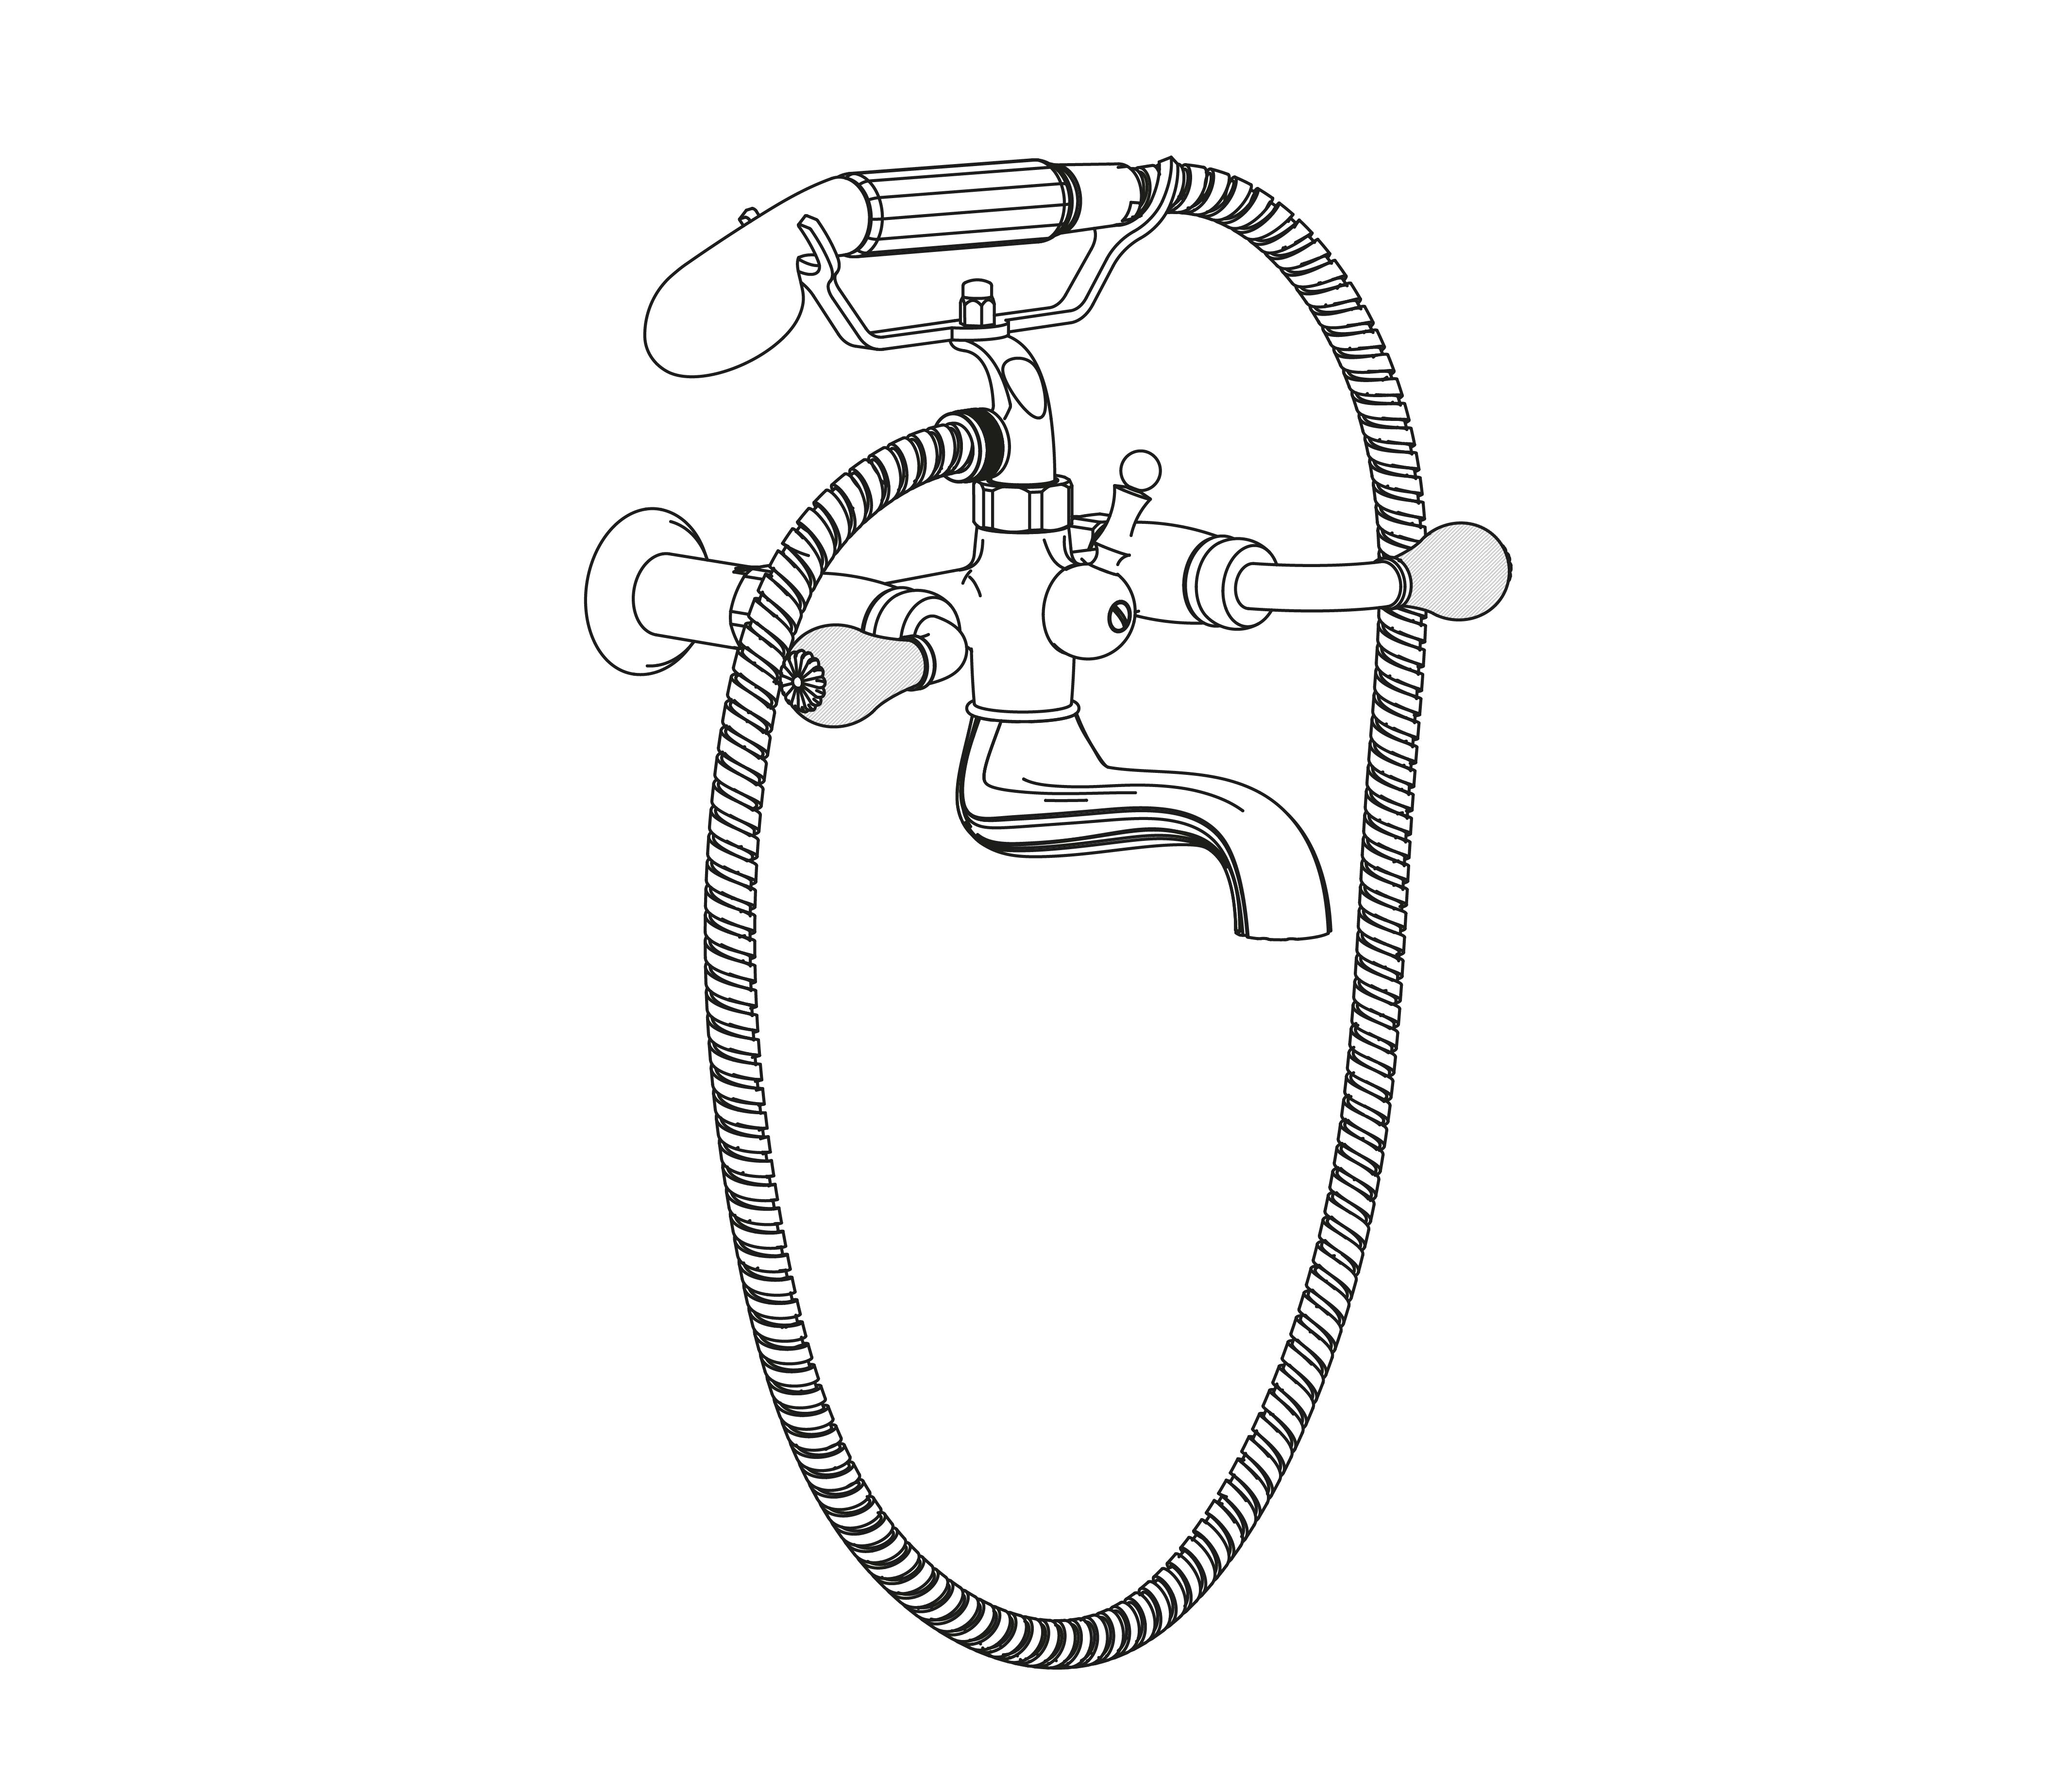 C59-3201 Wall mounted bath and shower mixer